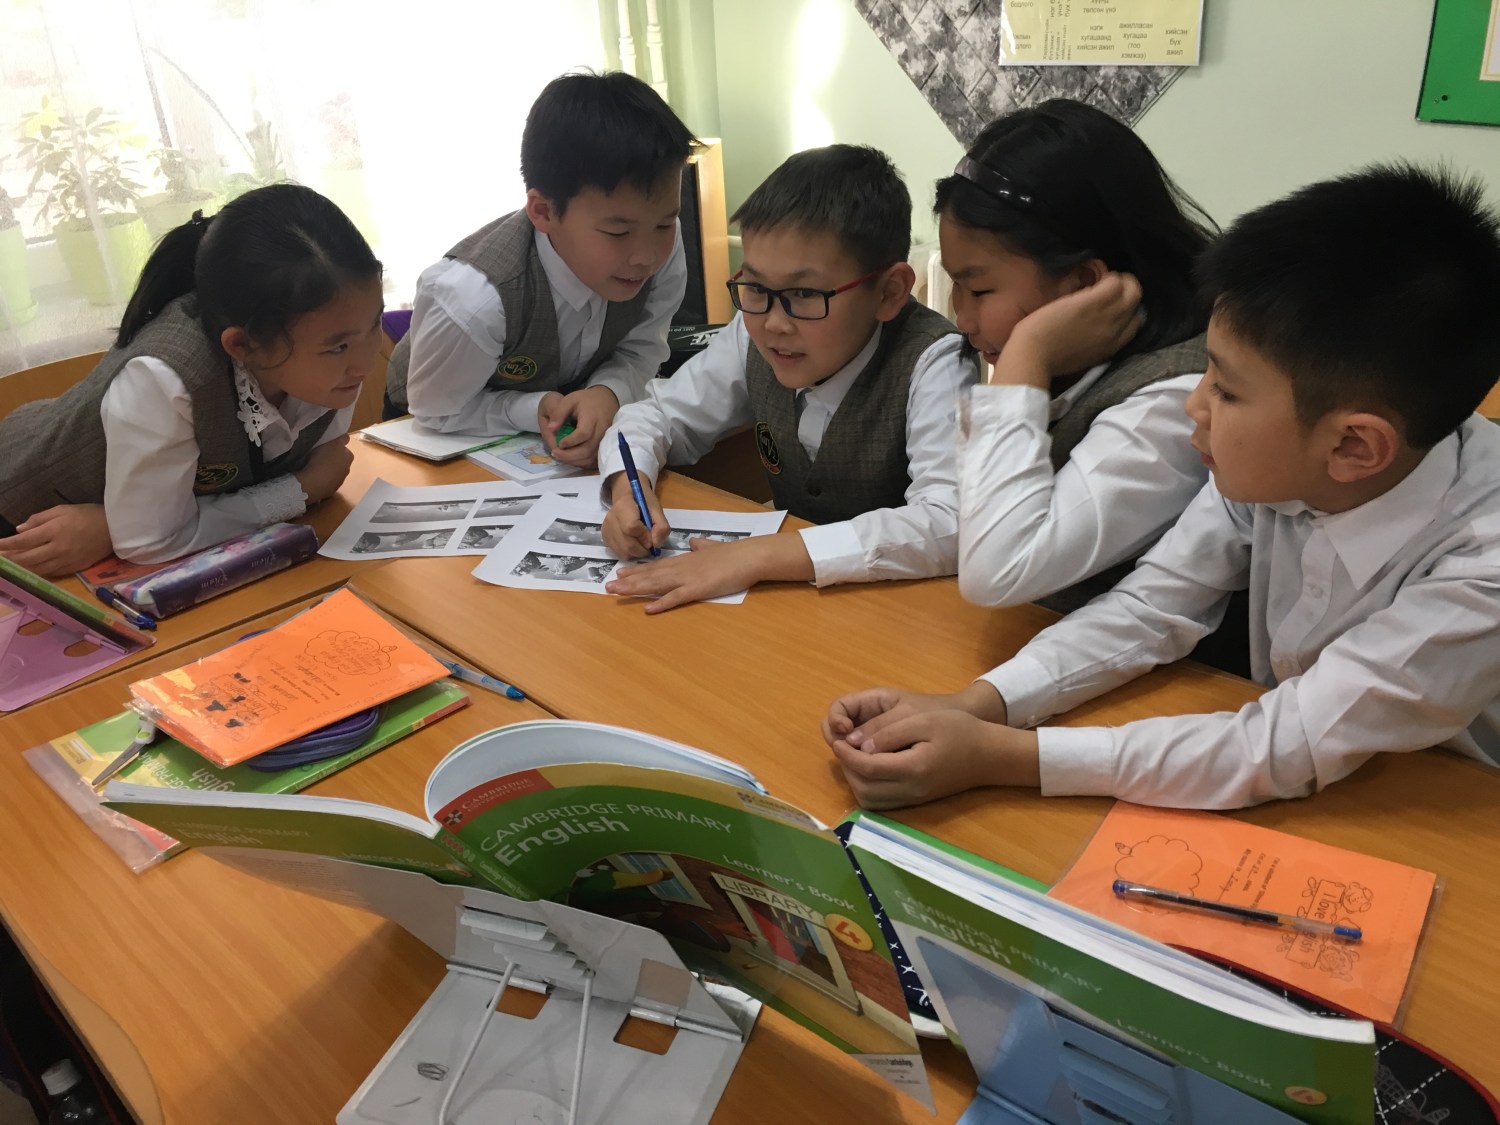 Students working collaboratively in a Mongolian school